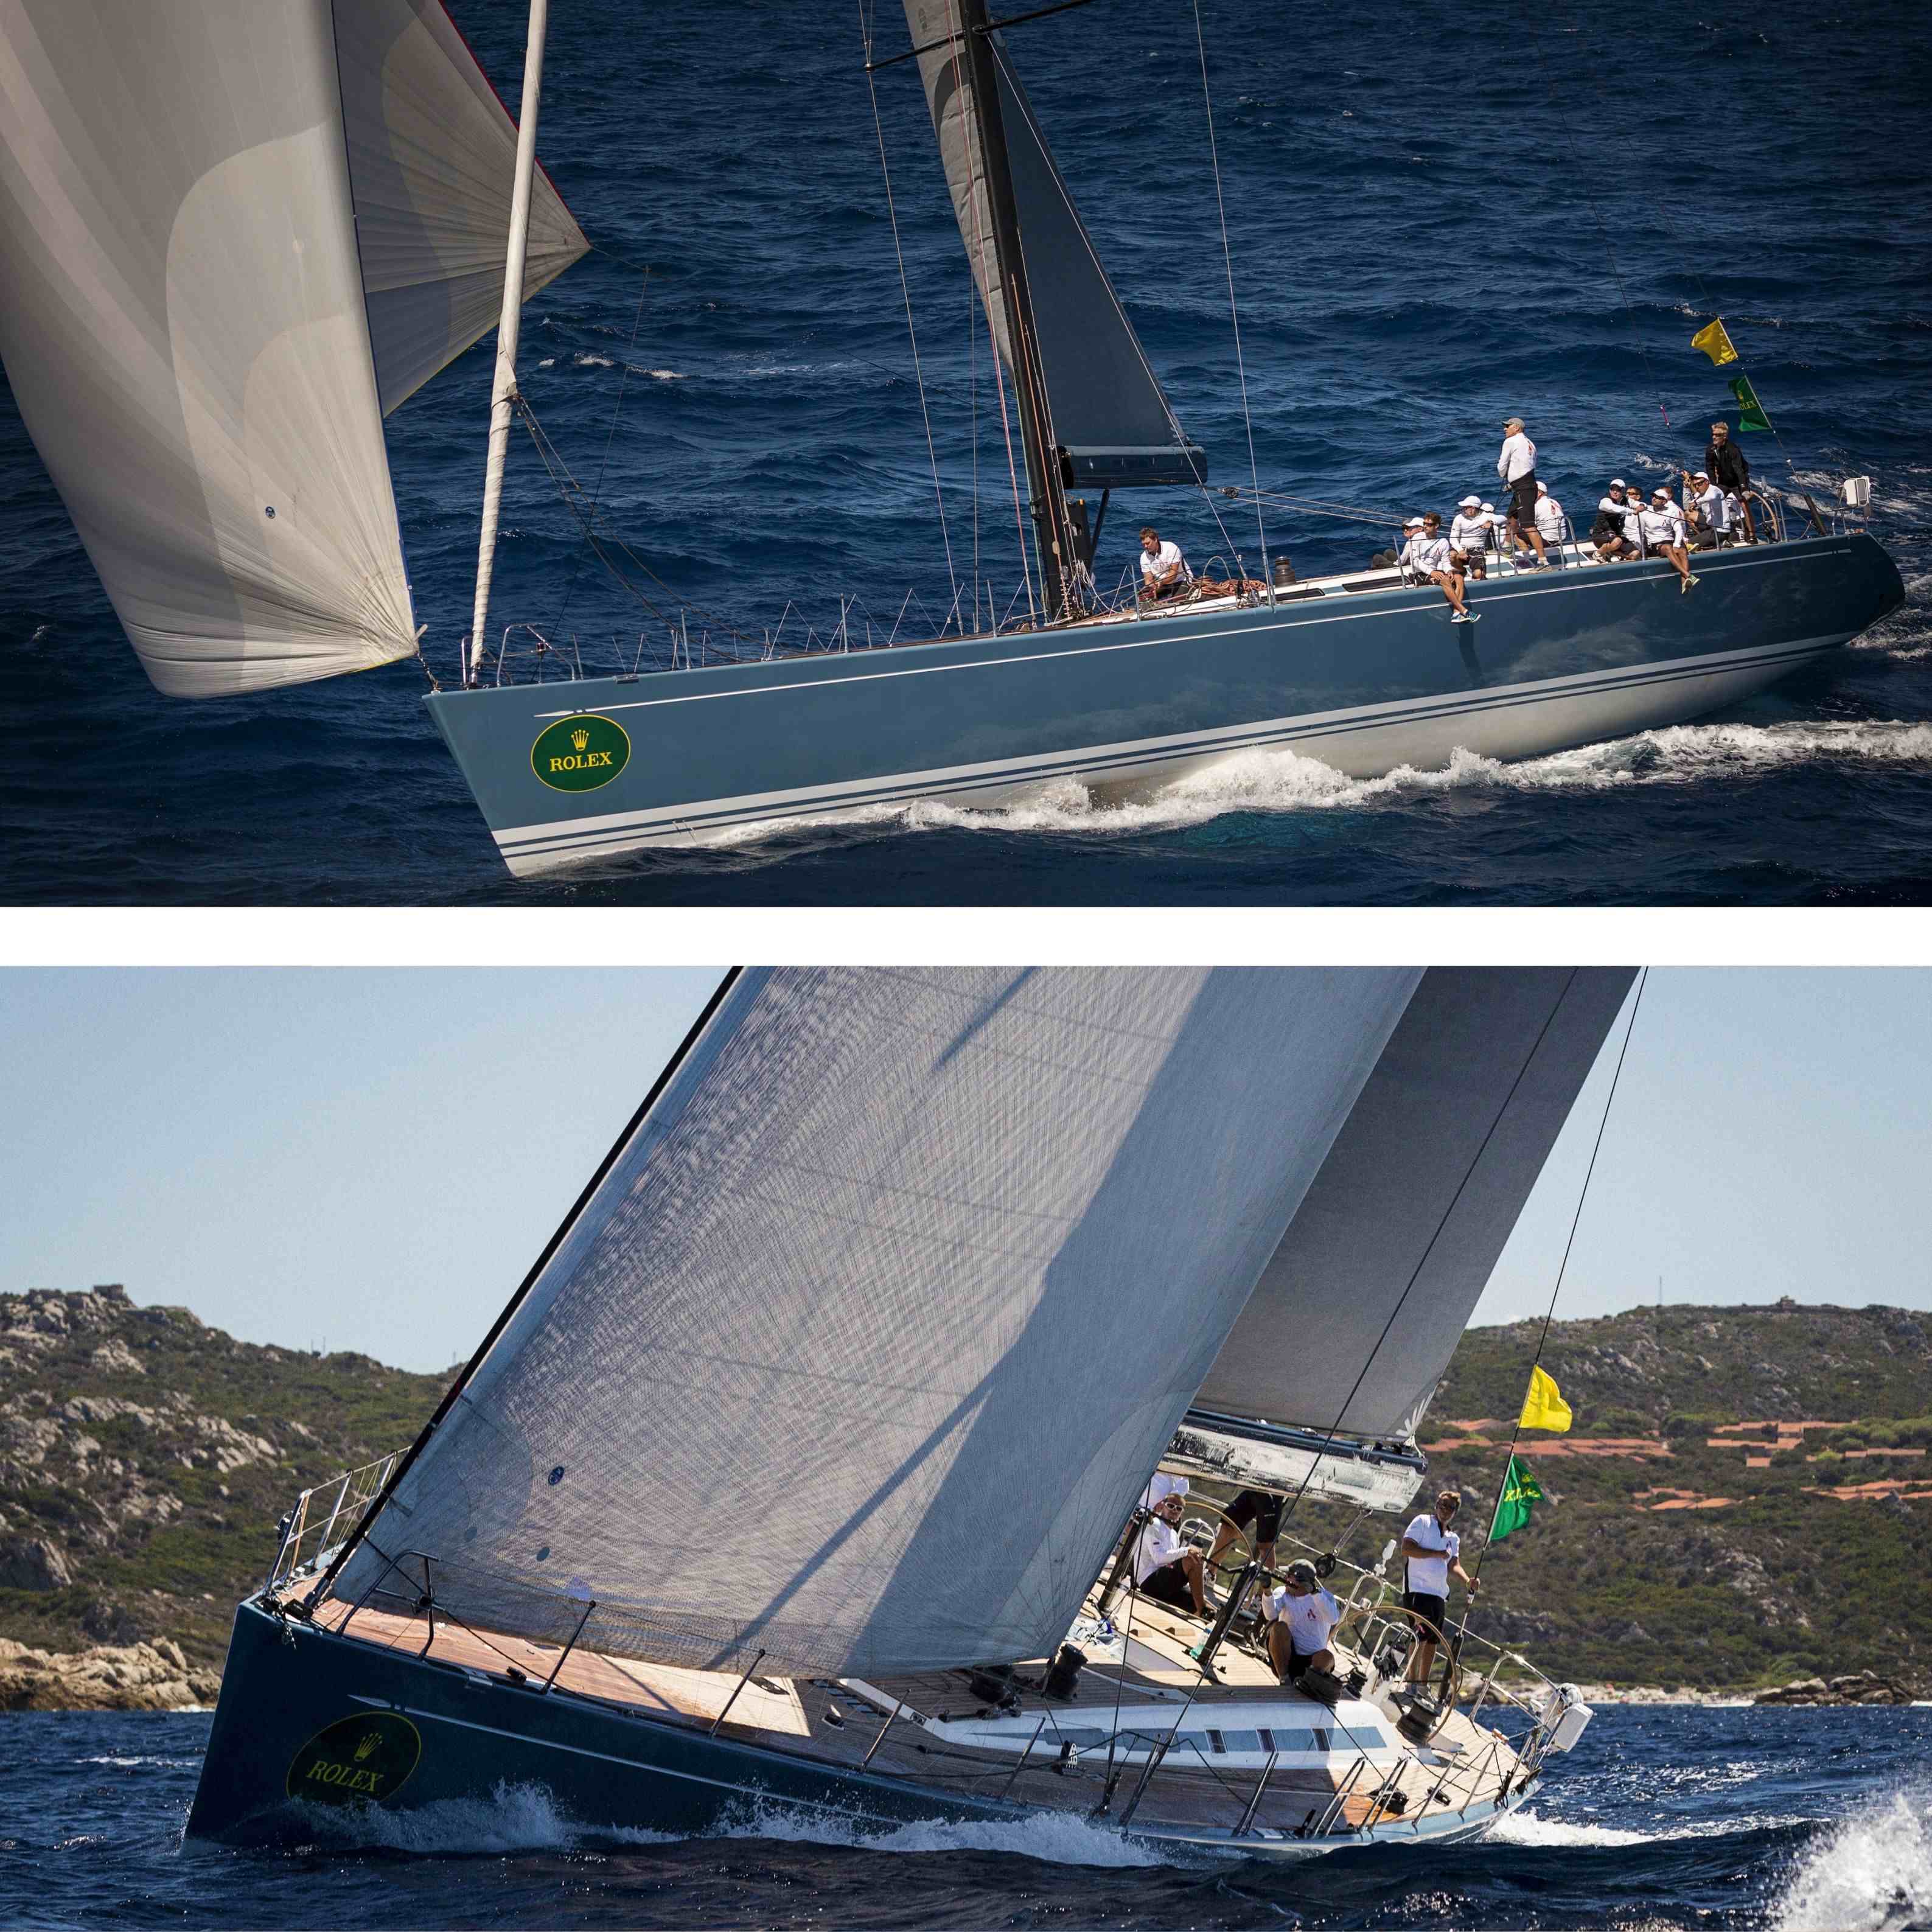 KALLIMA: available for the Maxi Yacht Rolex Cup 2022